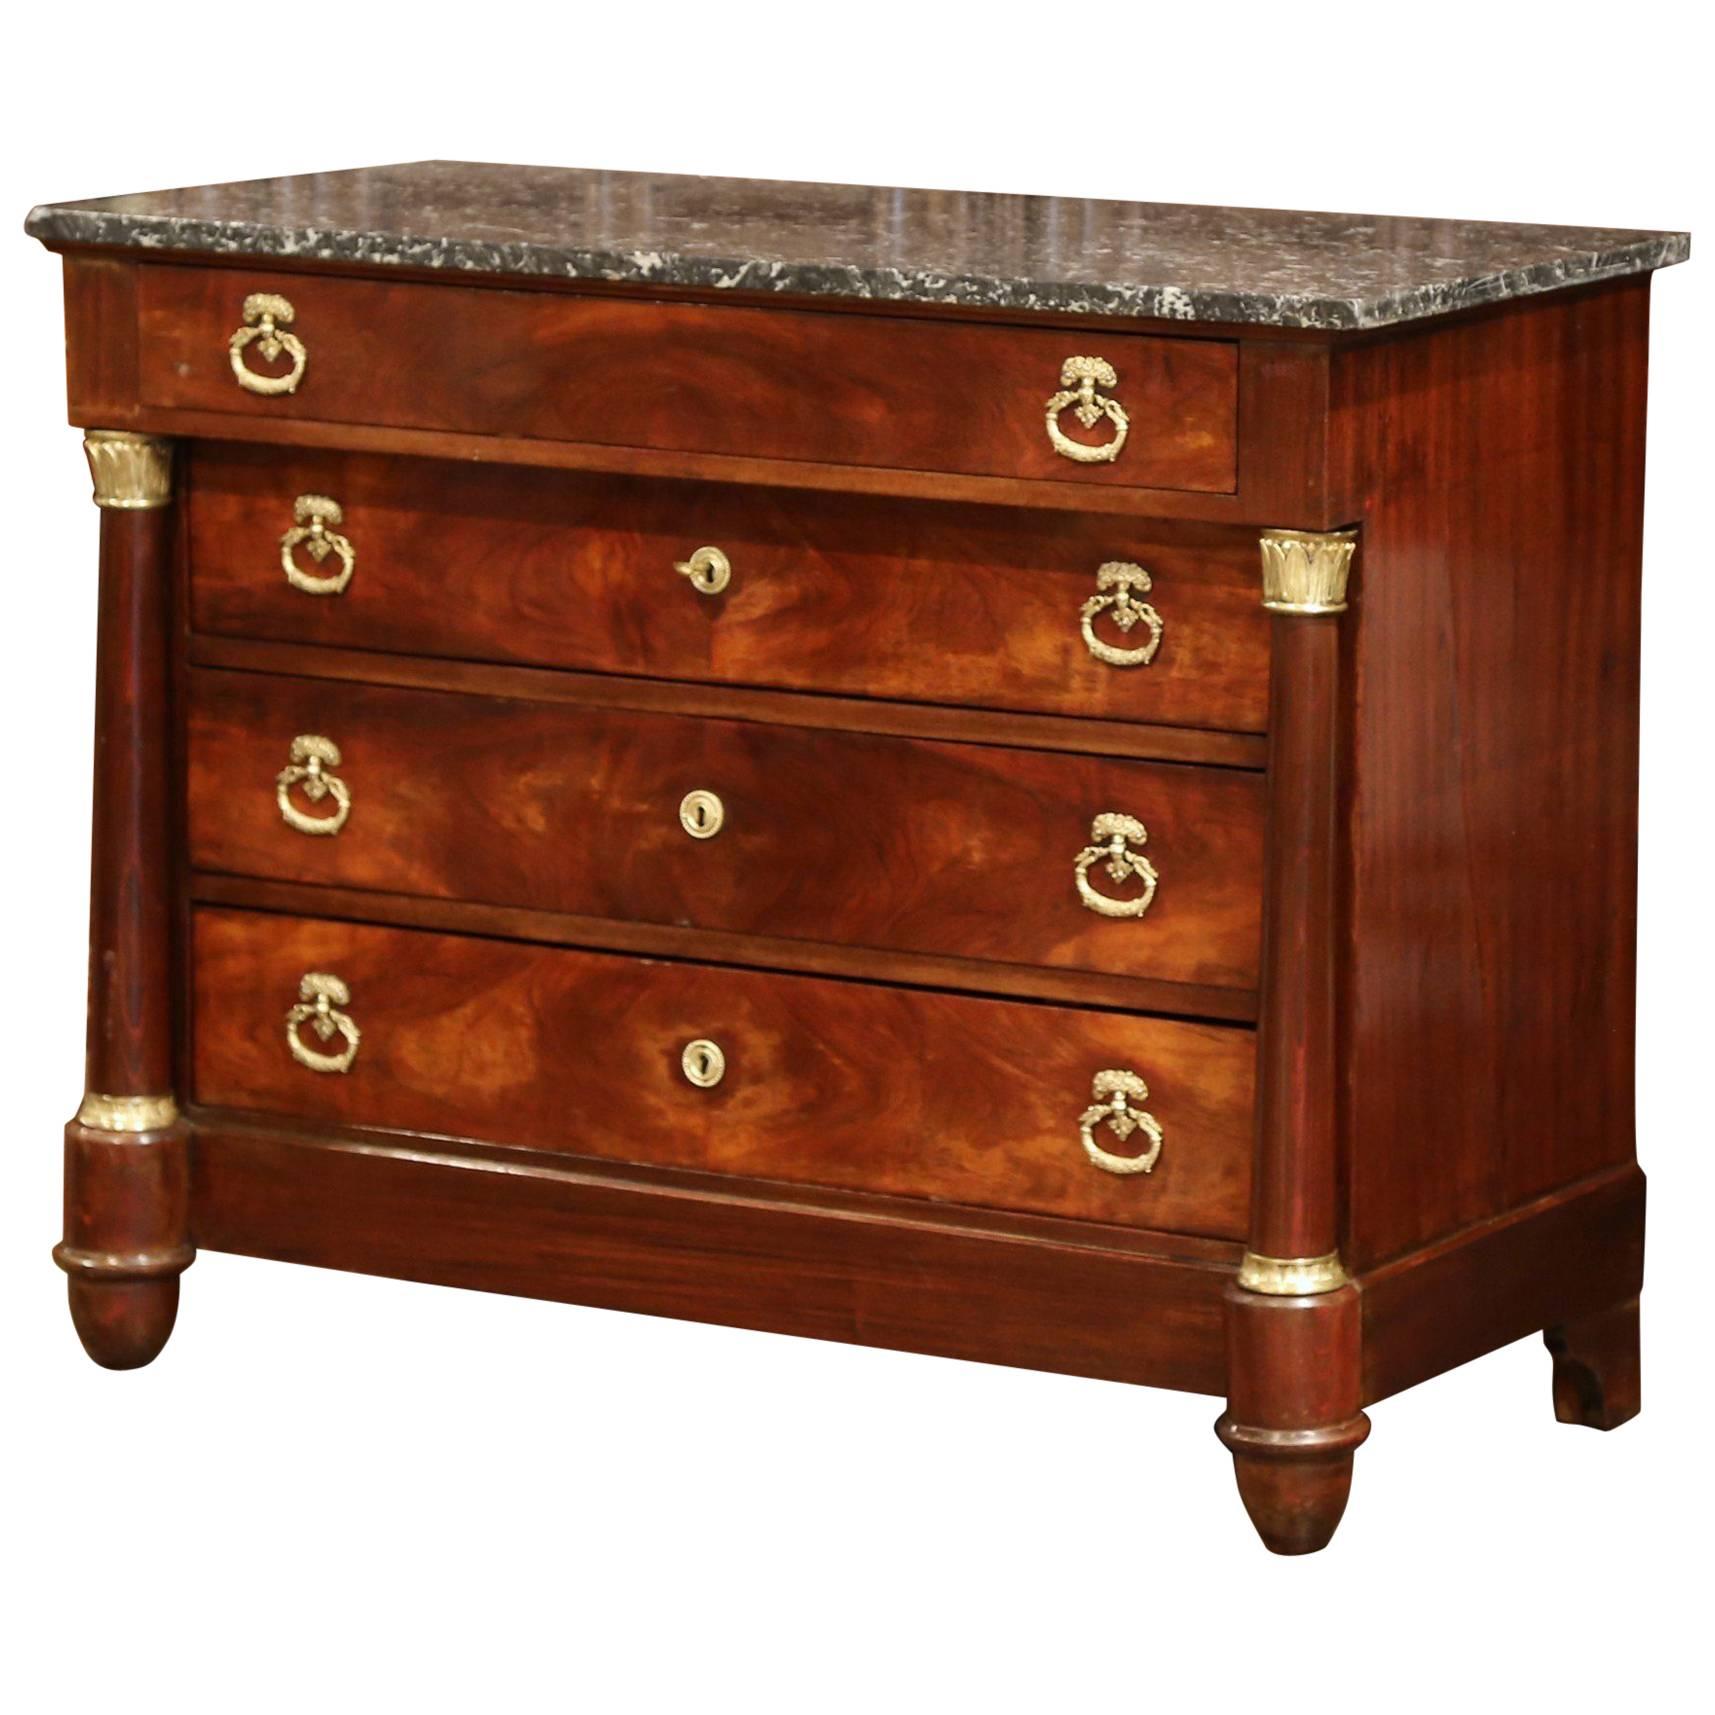 19th Century French Empire Walnut Four-Drawer Commode with Black Marble Top